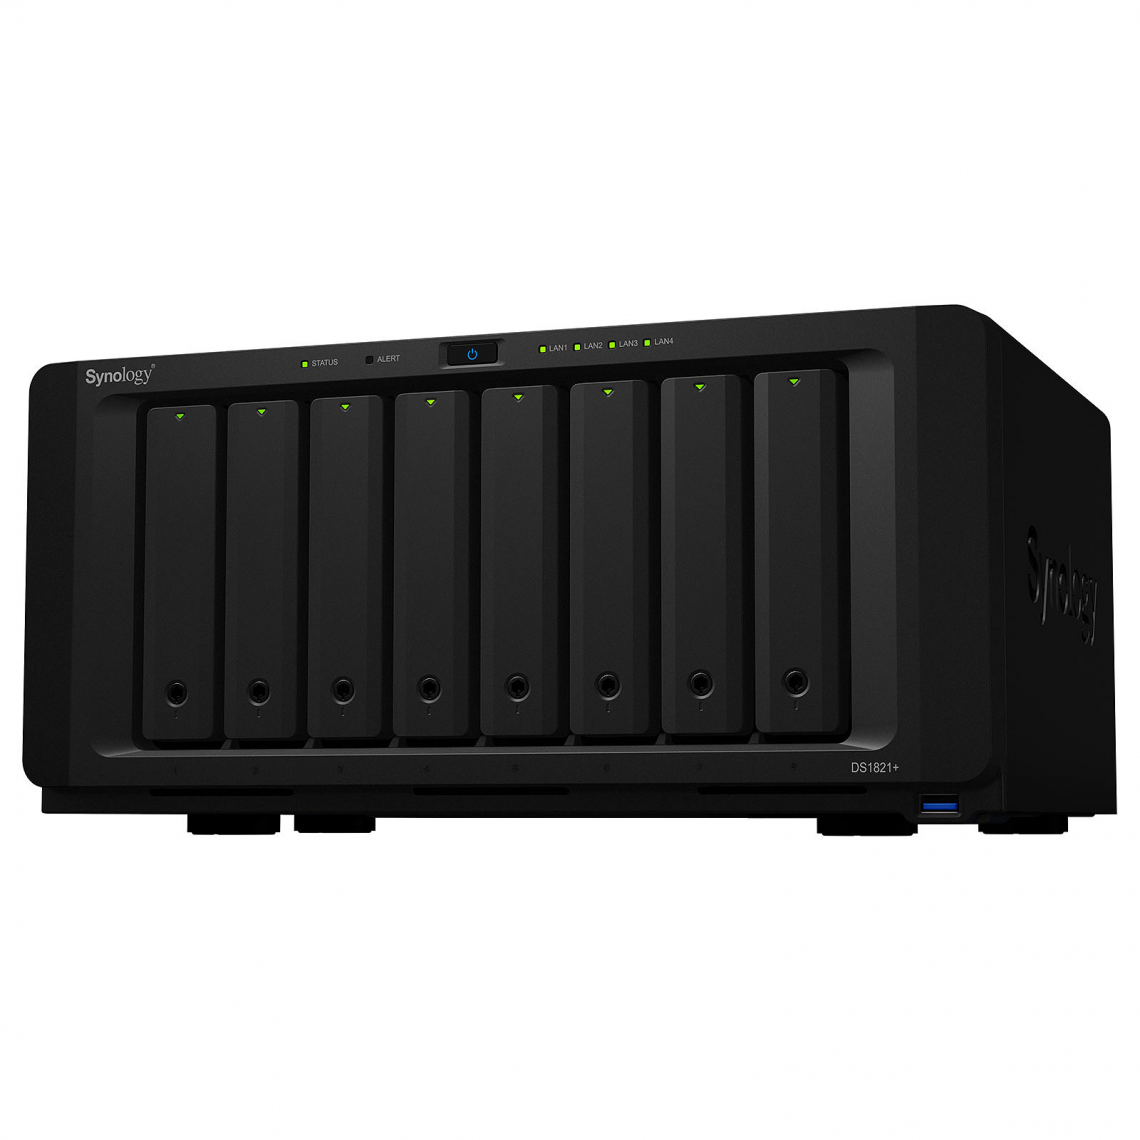 Synology - DS1821+ - 8 baies - NAS